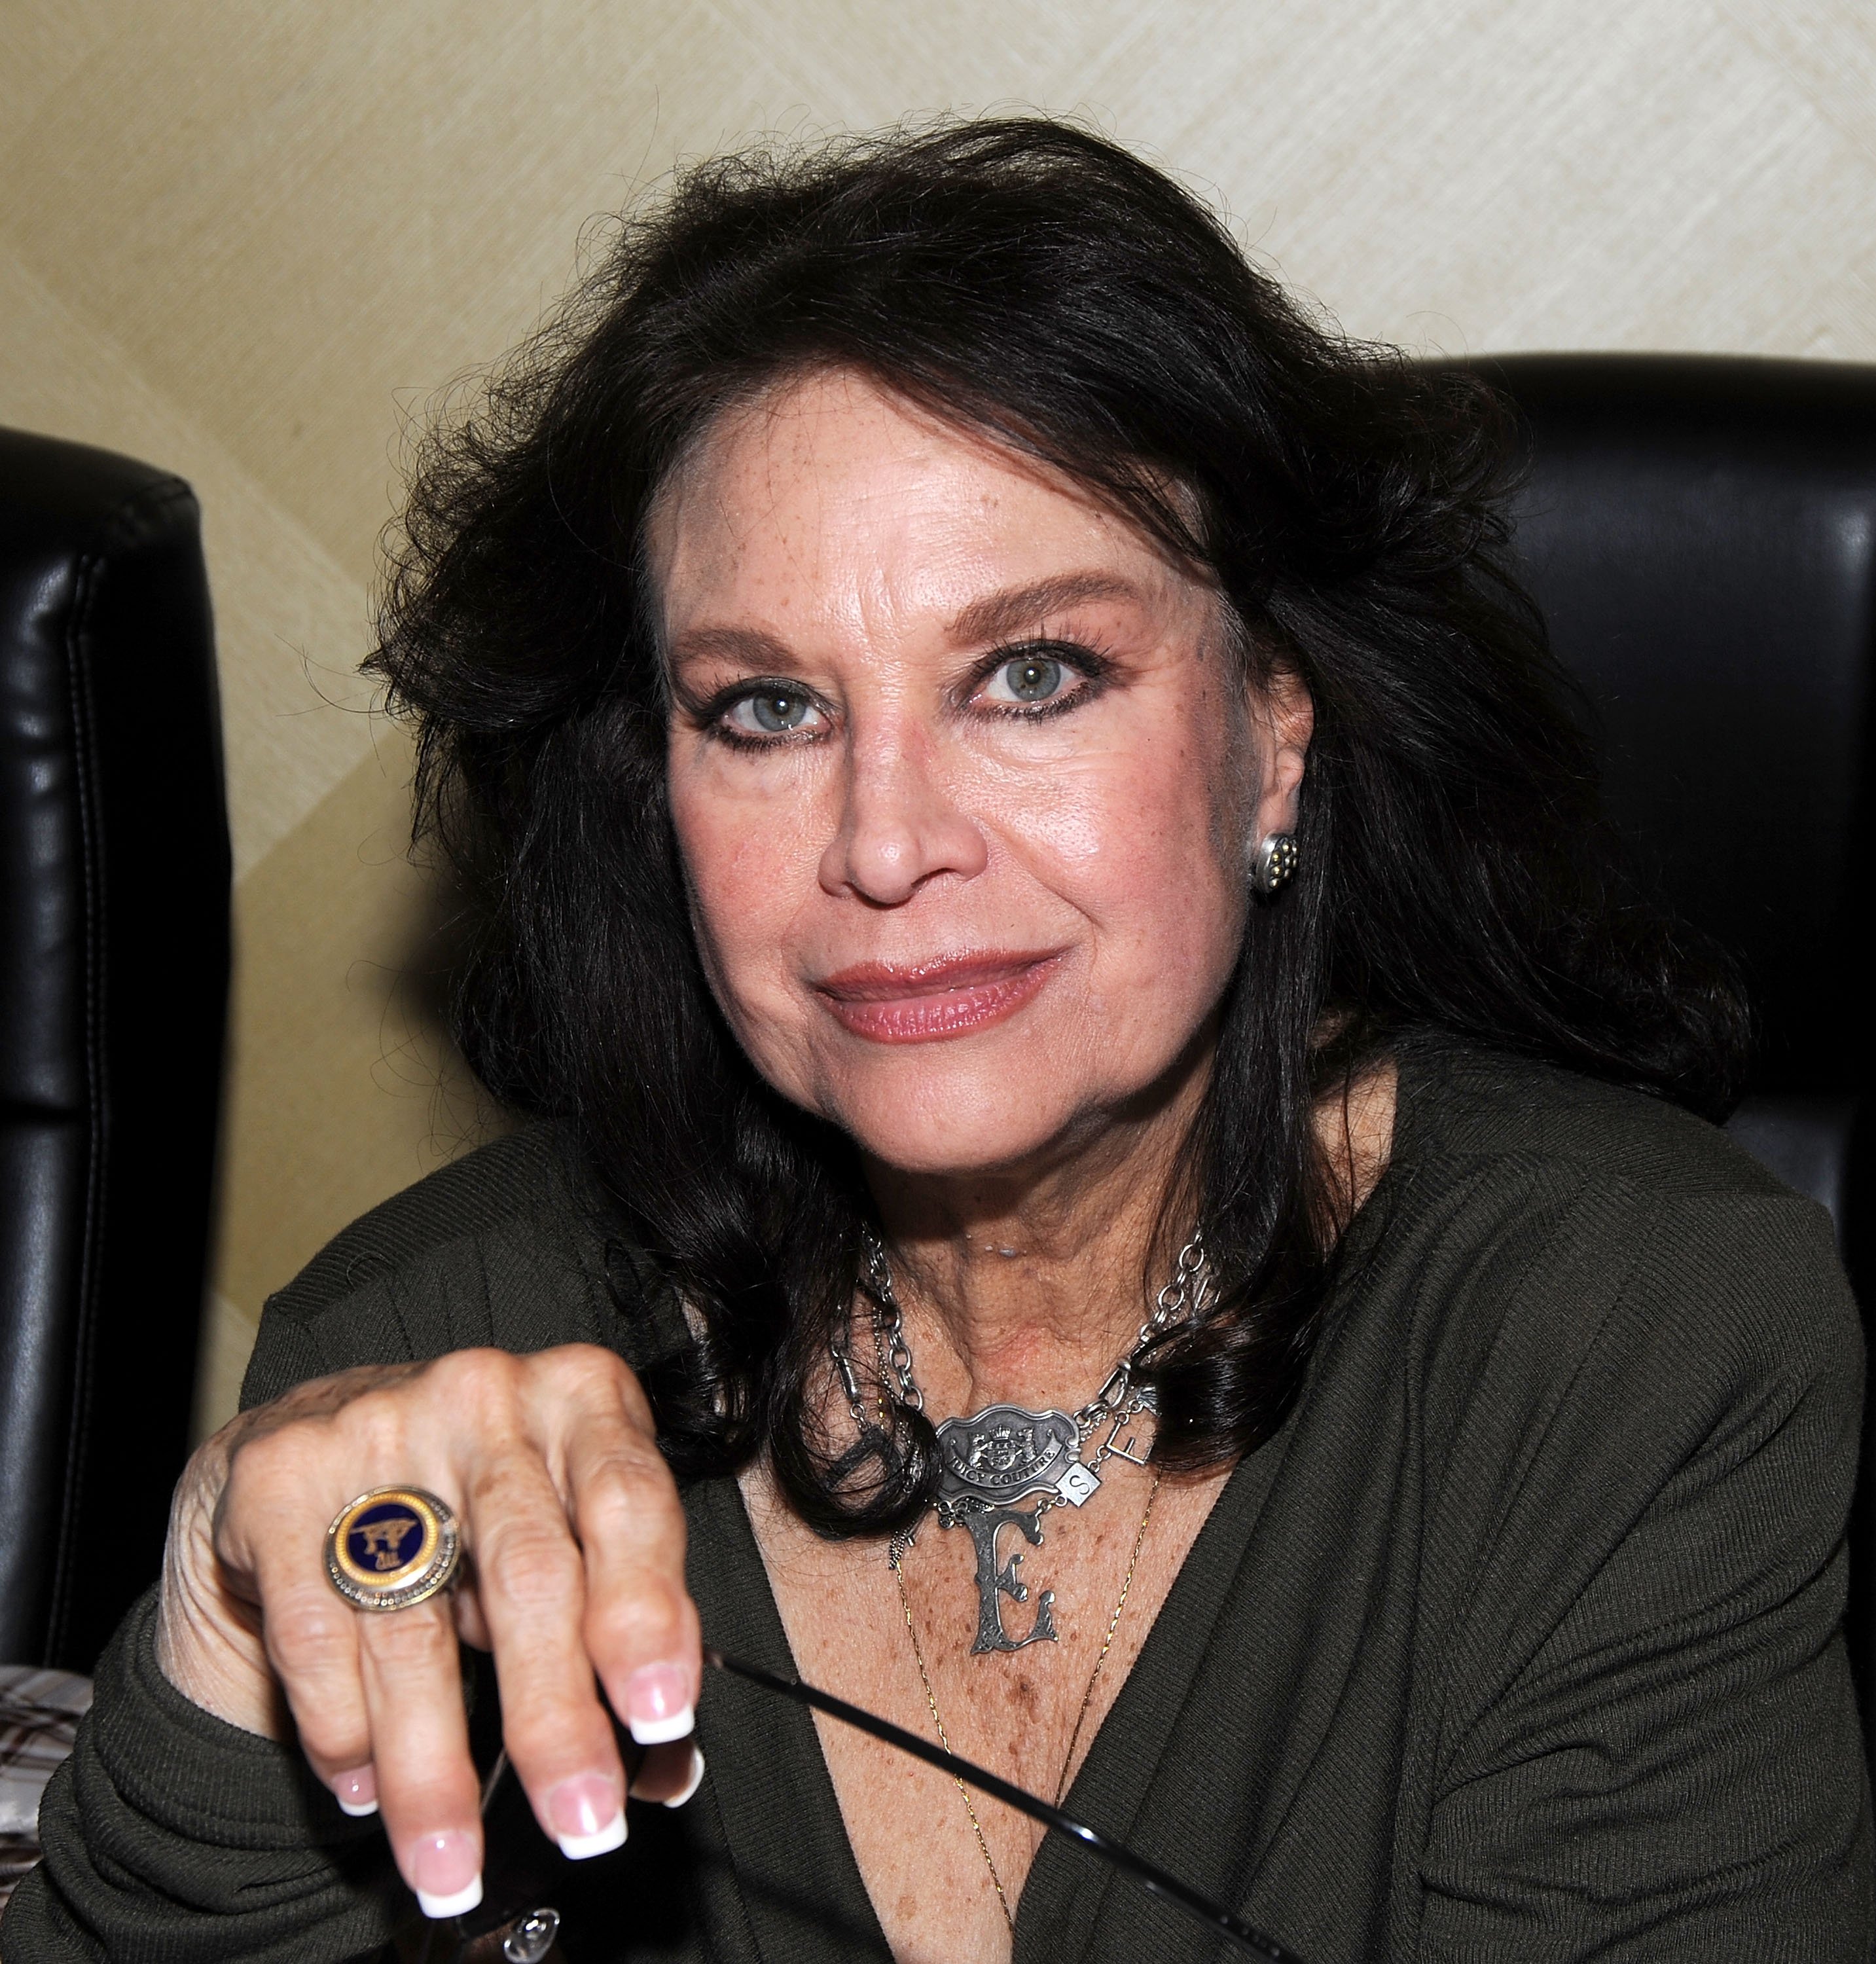 Lana Wood attends the 2011 Chiller Theater Expo at Hilton Parsippany on October 29, 2011 in Parsippany, New Jersey |  Source: Getty Images